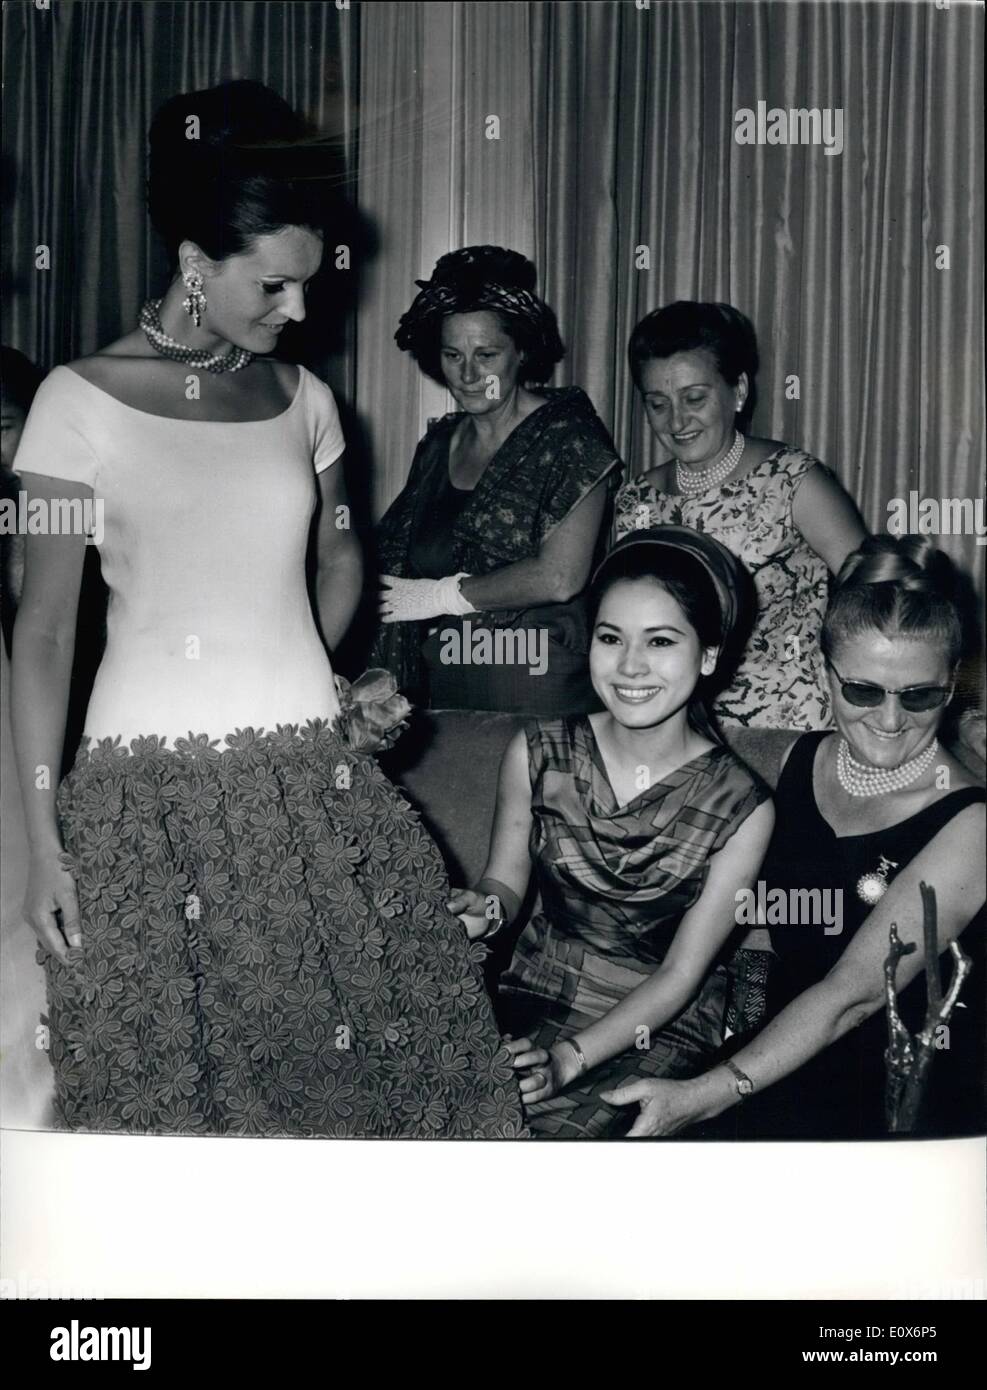 Jul. 07, 1965 - Rome President Sukarno's new wife Visit Roma: Ratna Sari Dewi, 24, the beautiful Japanese wife of Dr. Sukarno, the Indonesian President arrived yesterday on her first visit to Rome, Madame Sukarno, one of the President's three wives, is here to a little stay. Photo shows Madame Sukarno pictured on the atelier of Fontana sister, Whil assists to a defile. Stock Photo